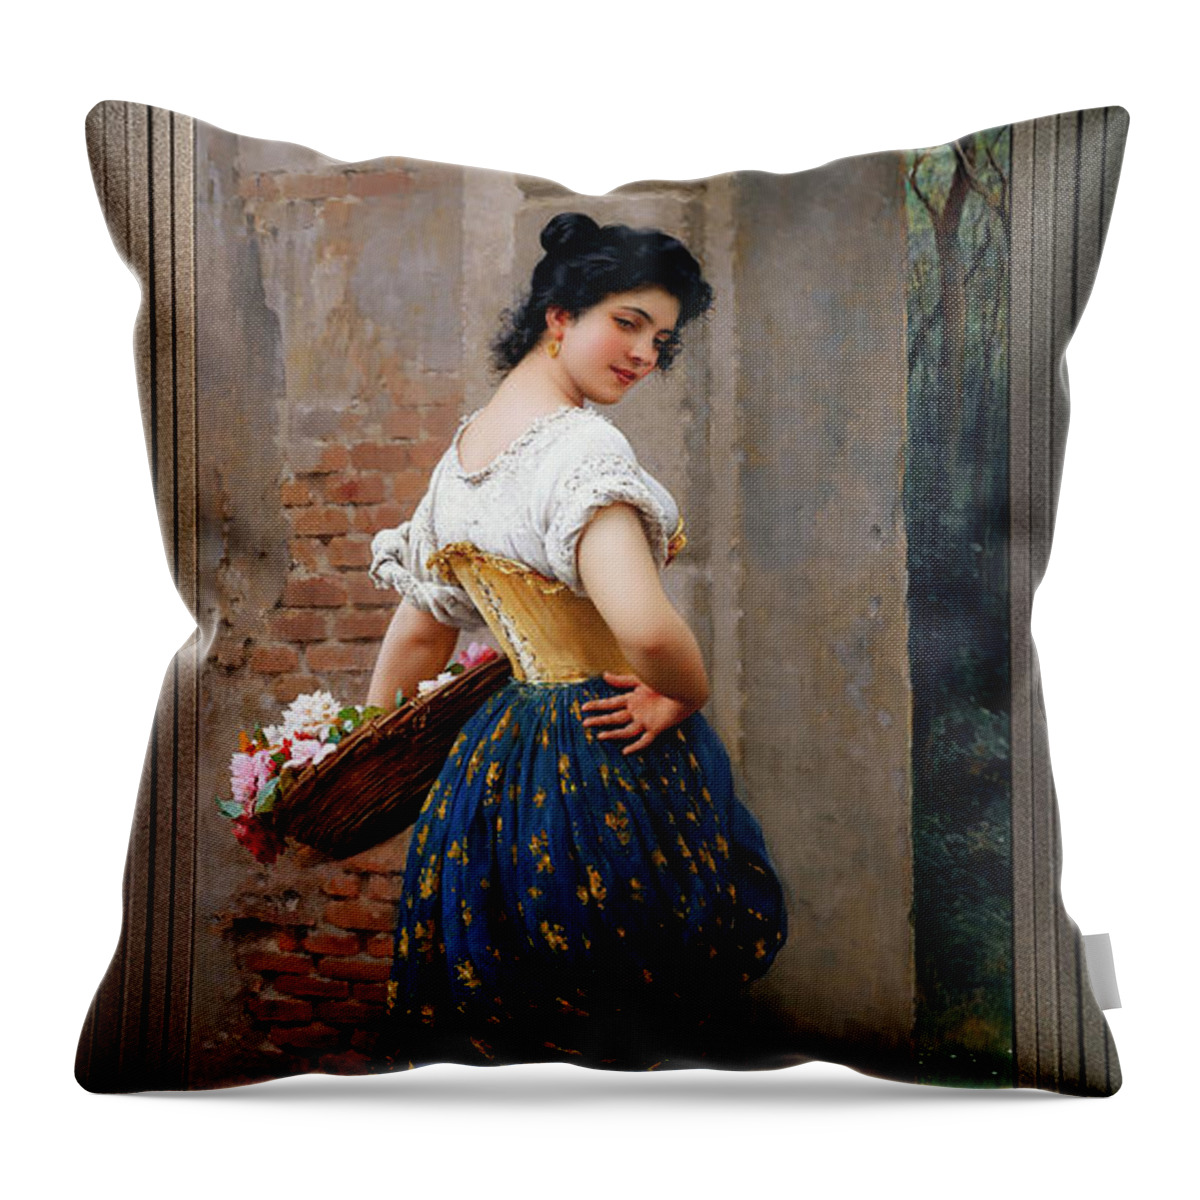 A Maiden With A Basket Of Roses Throw Pillow featuring the painting A Maiden With A Basket Of Roses by Eugen von Blaas Remastered Xzendor7 Classical Art Reproduction by Xzendor7